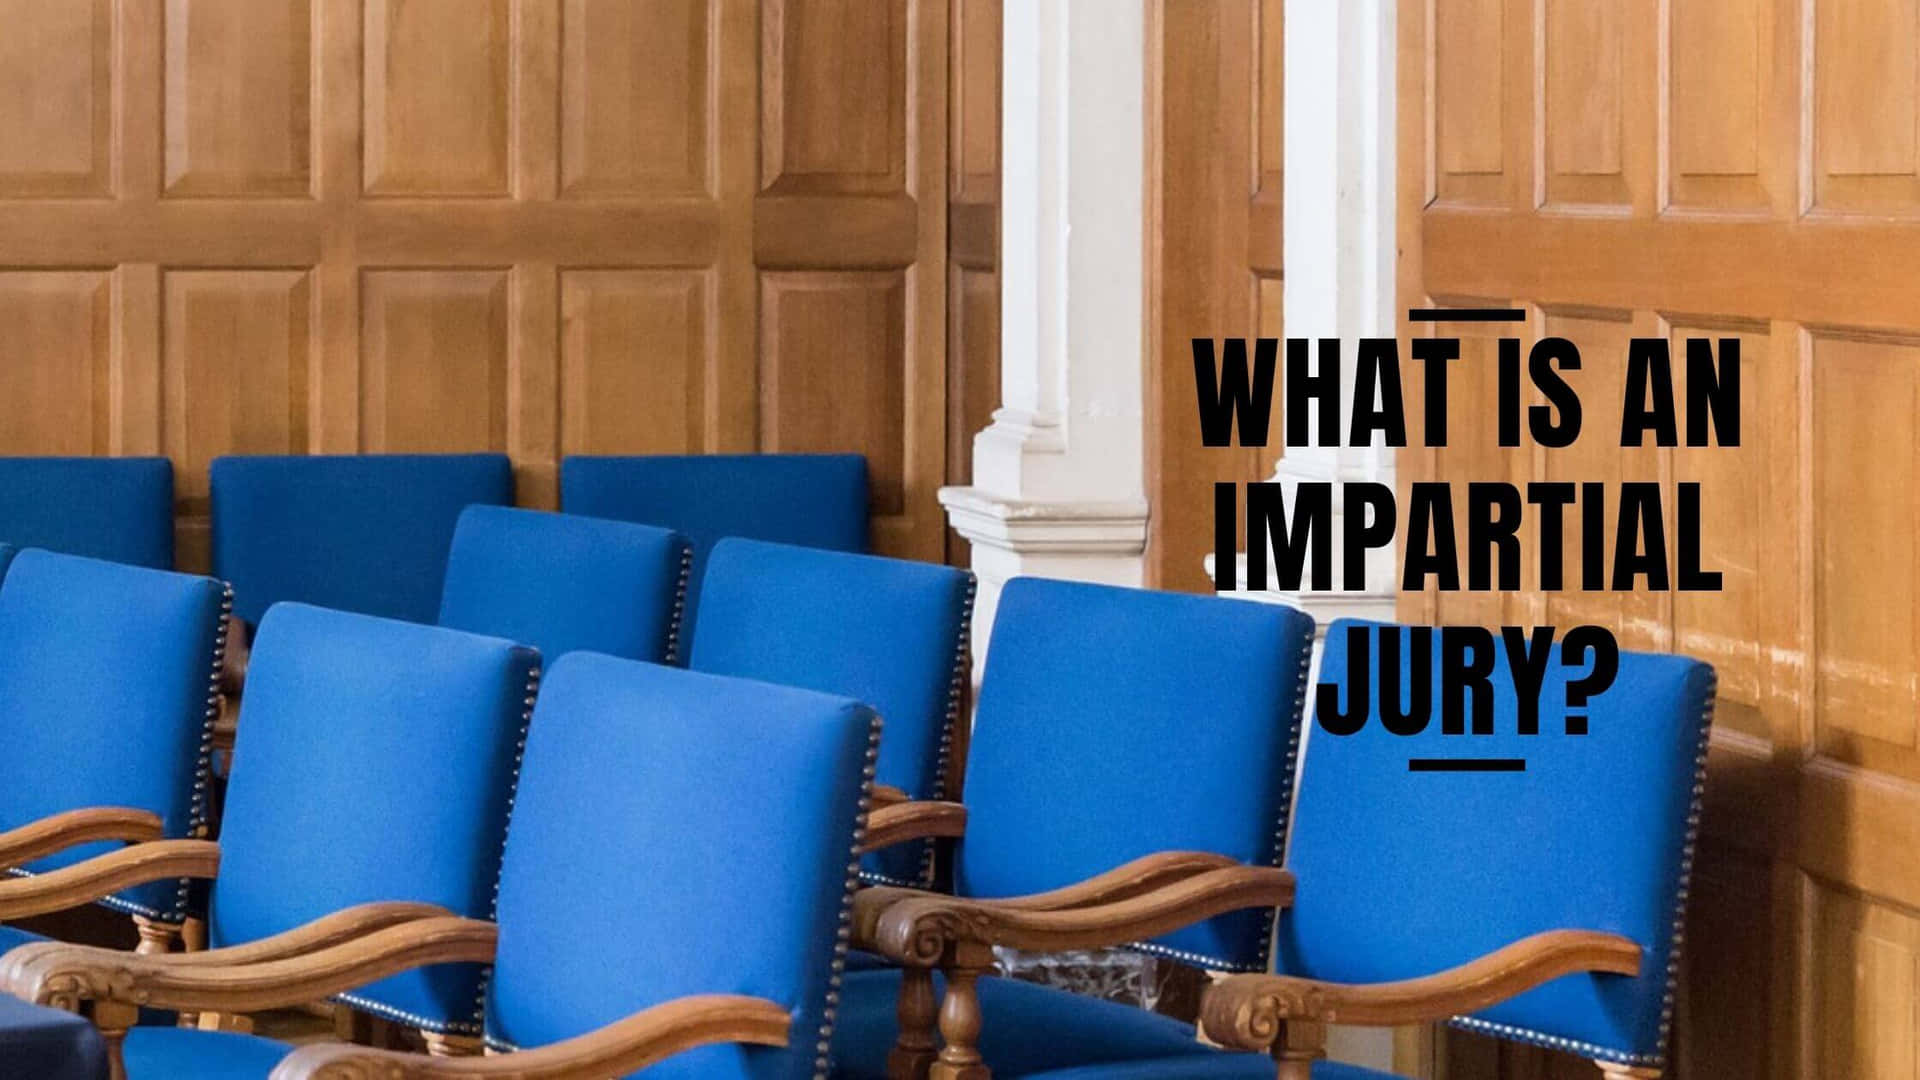 What Is An Impartial Jury? Wallpaper